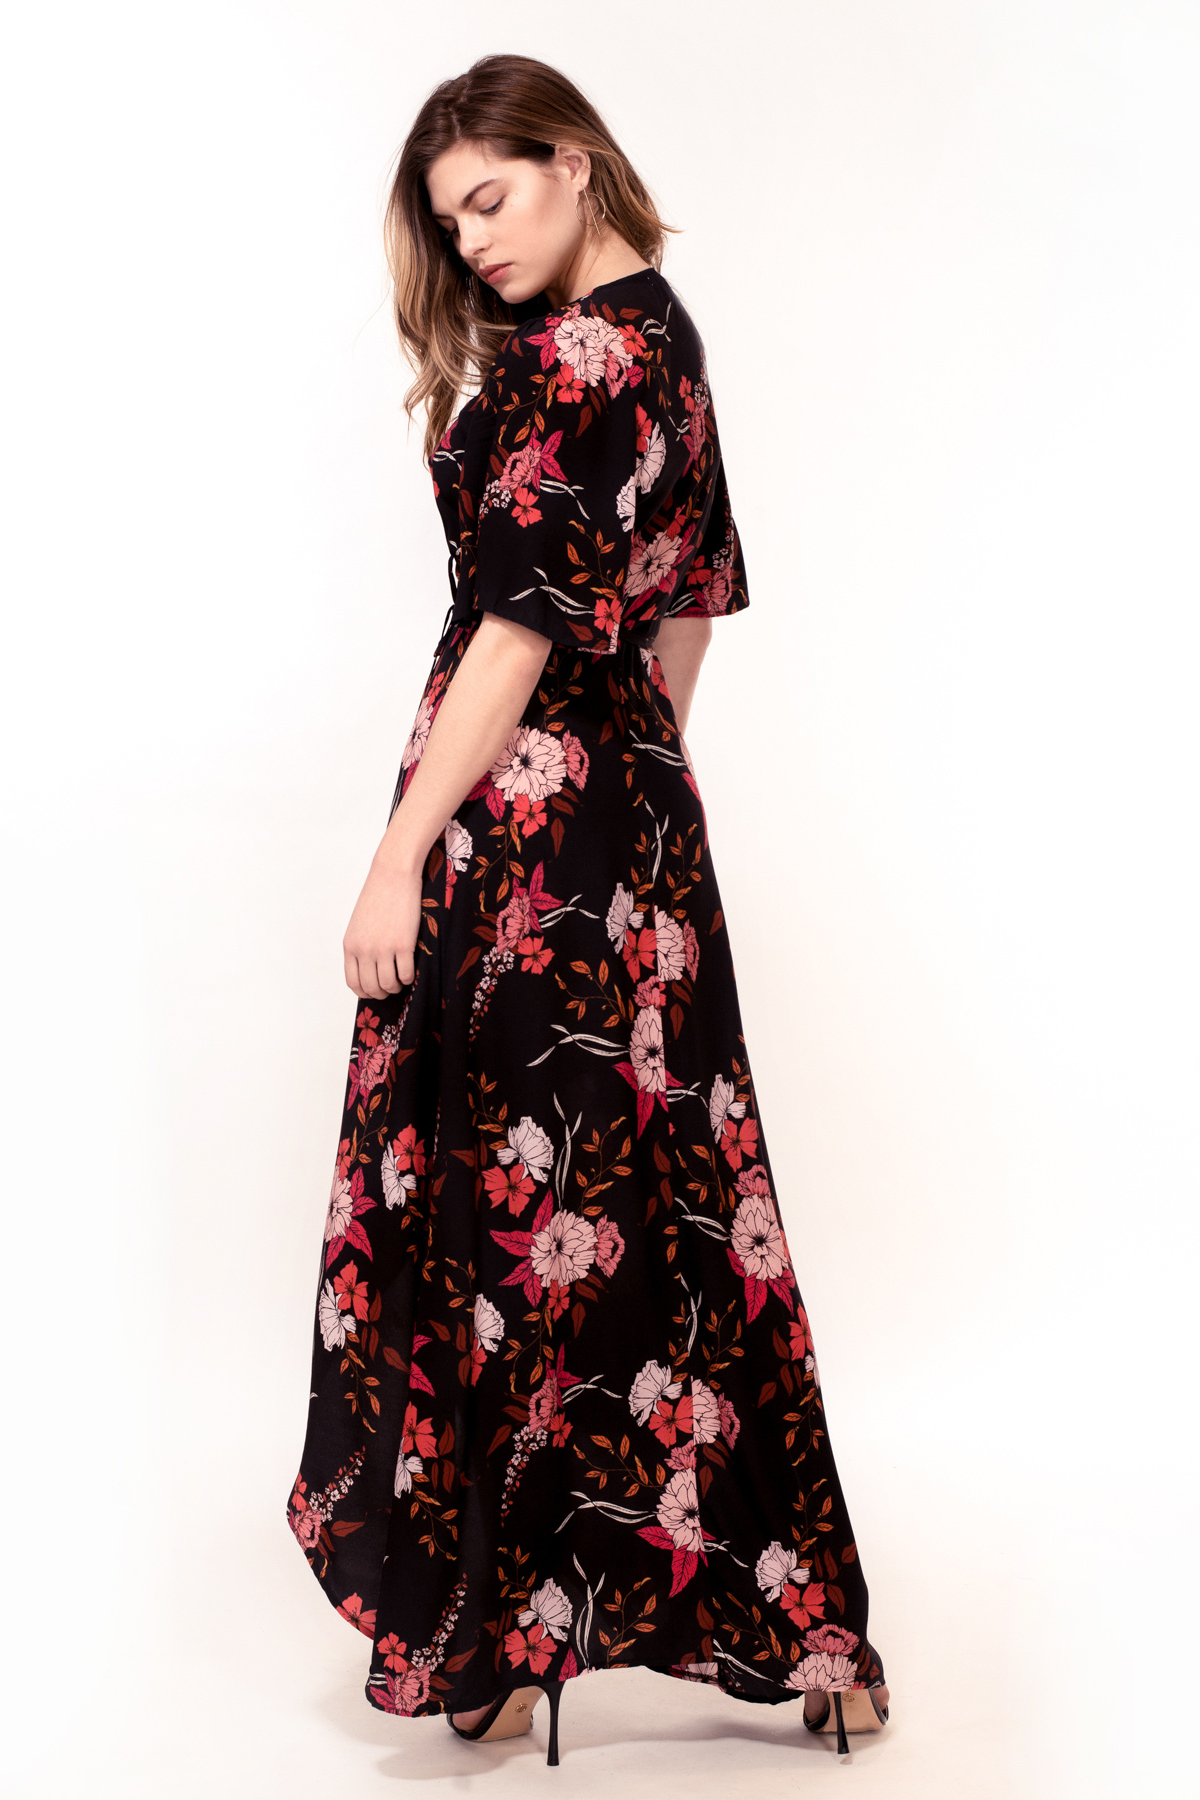 Hide the Label Rosa Maxi Dress in Rust Tulip Print, available on ZERRIN